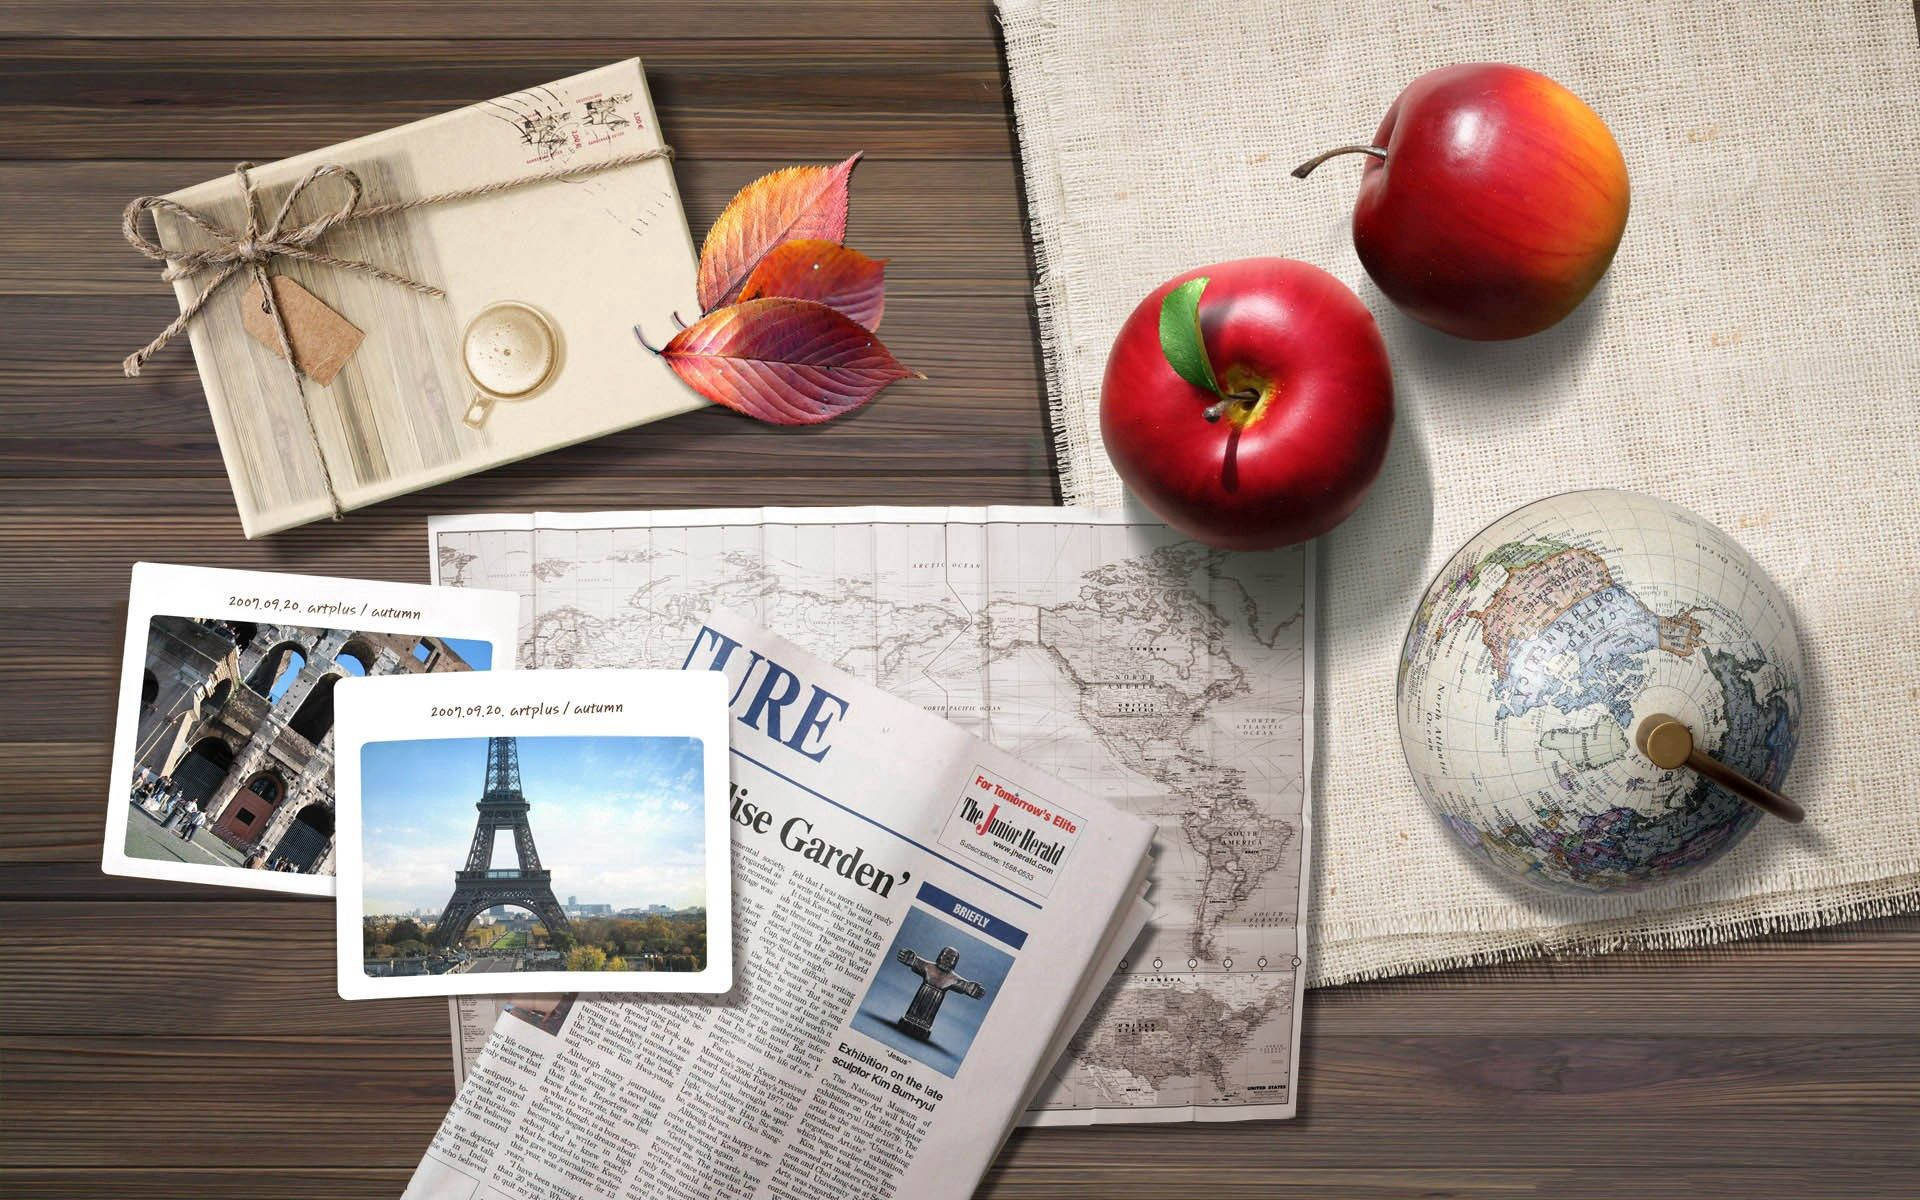 Travel, Apple, Drawings, Photographs, Table